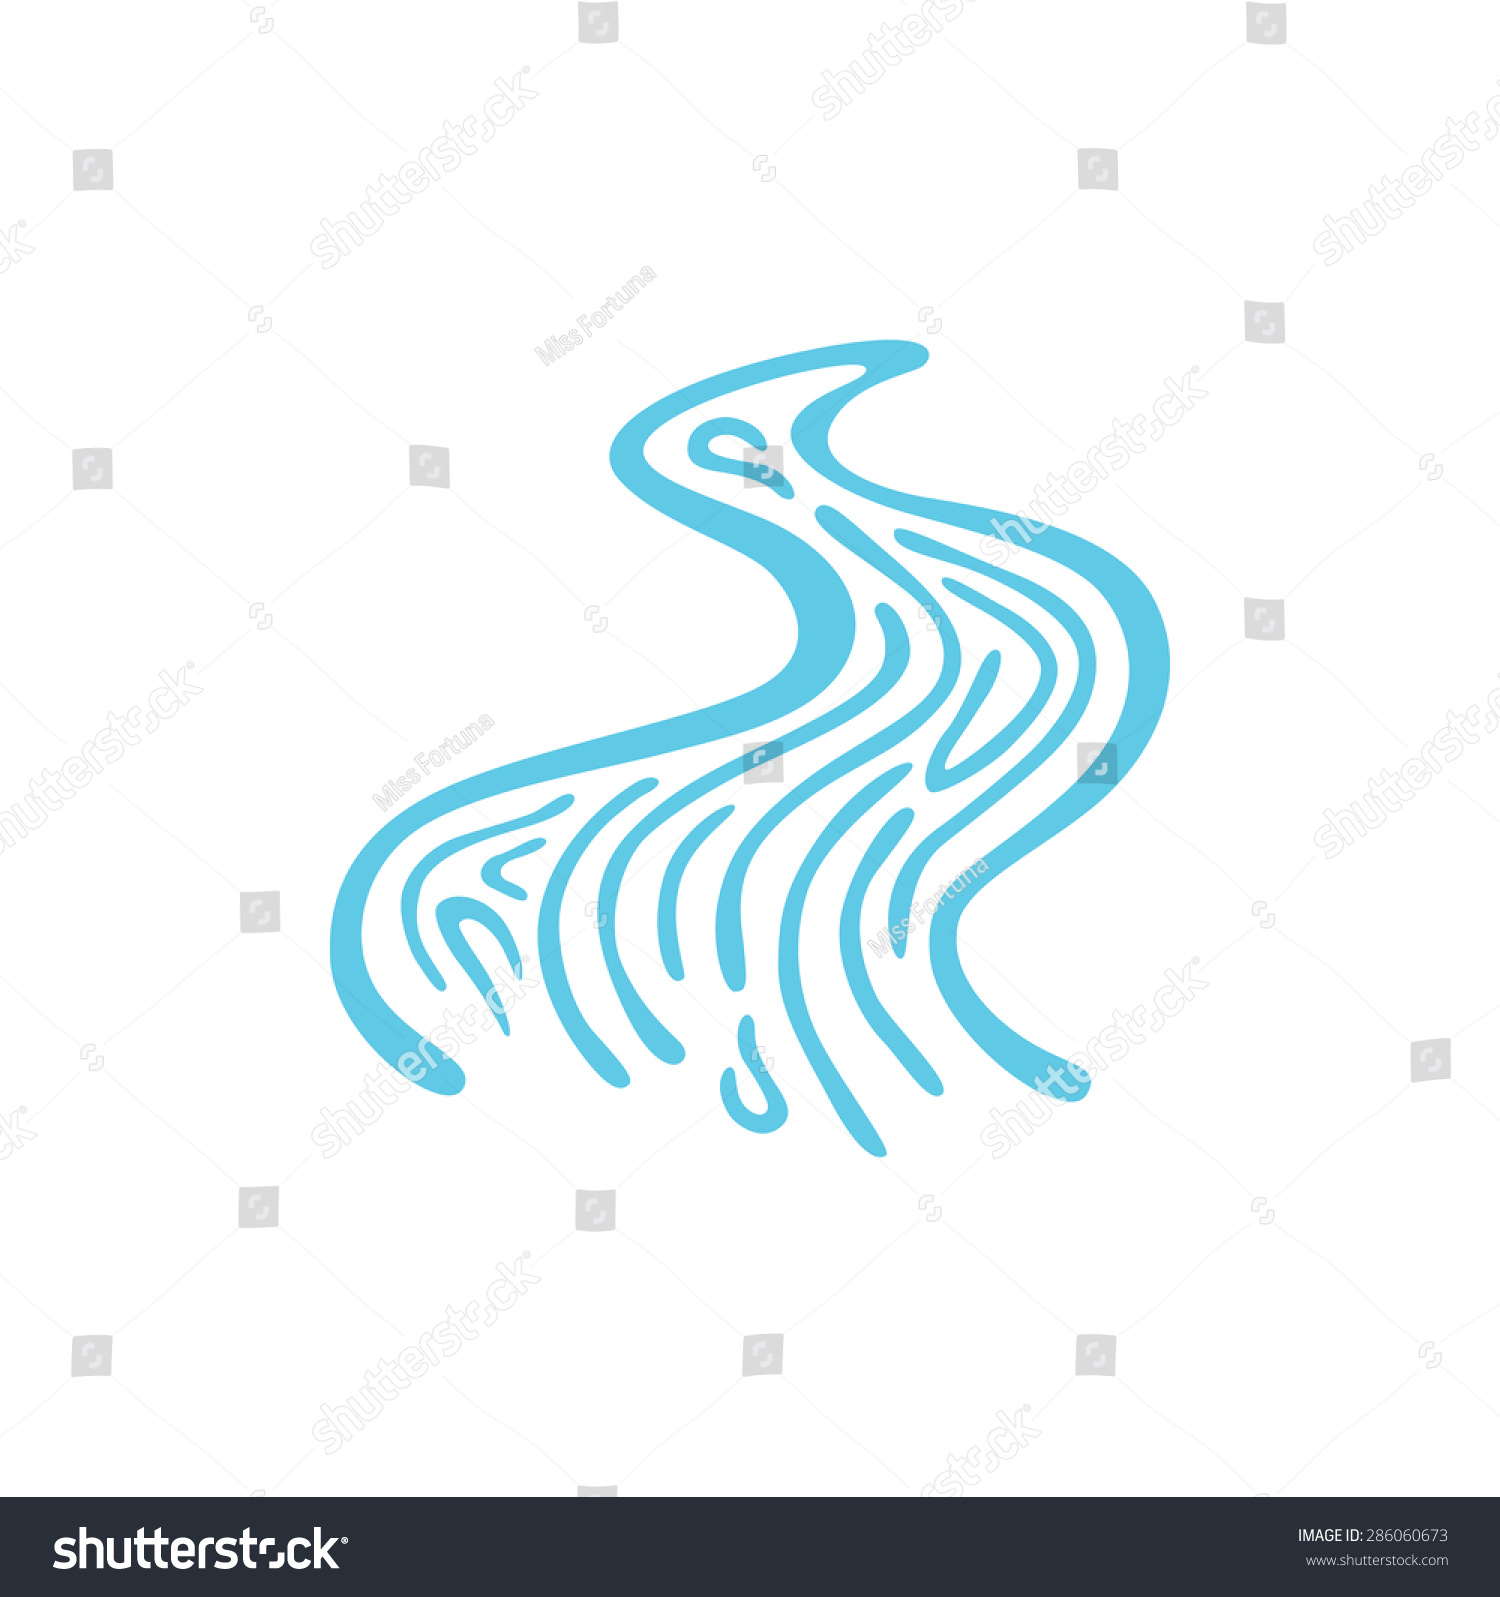 river water clipart - photo #26